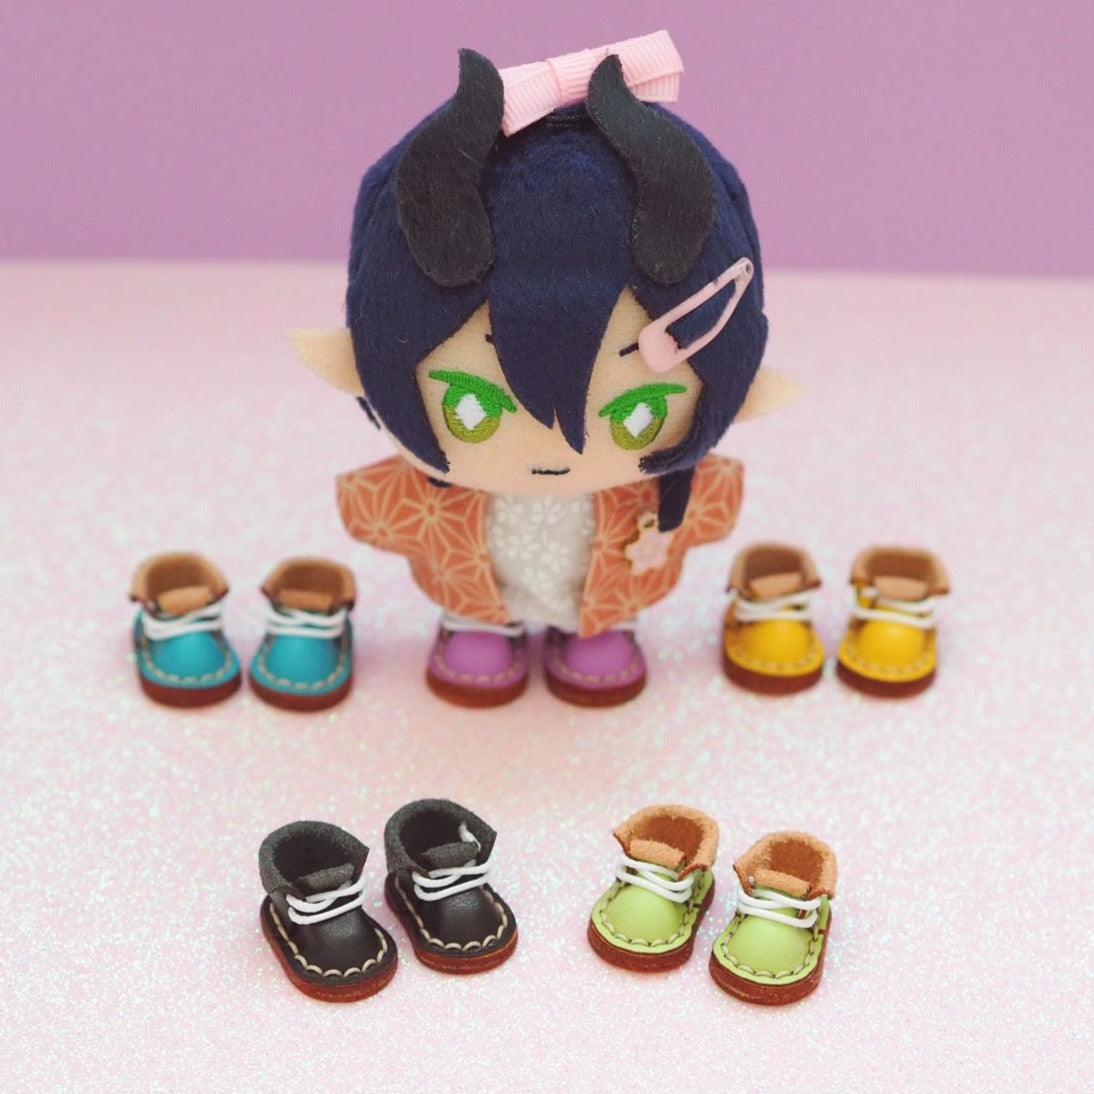 Cuffed Shoes for 10cm Nui Plush - Moko's Boutique